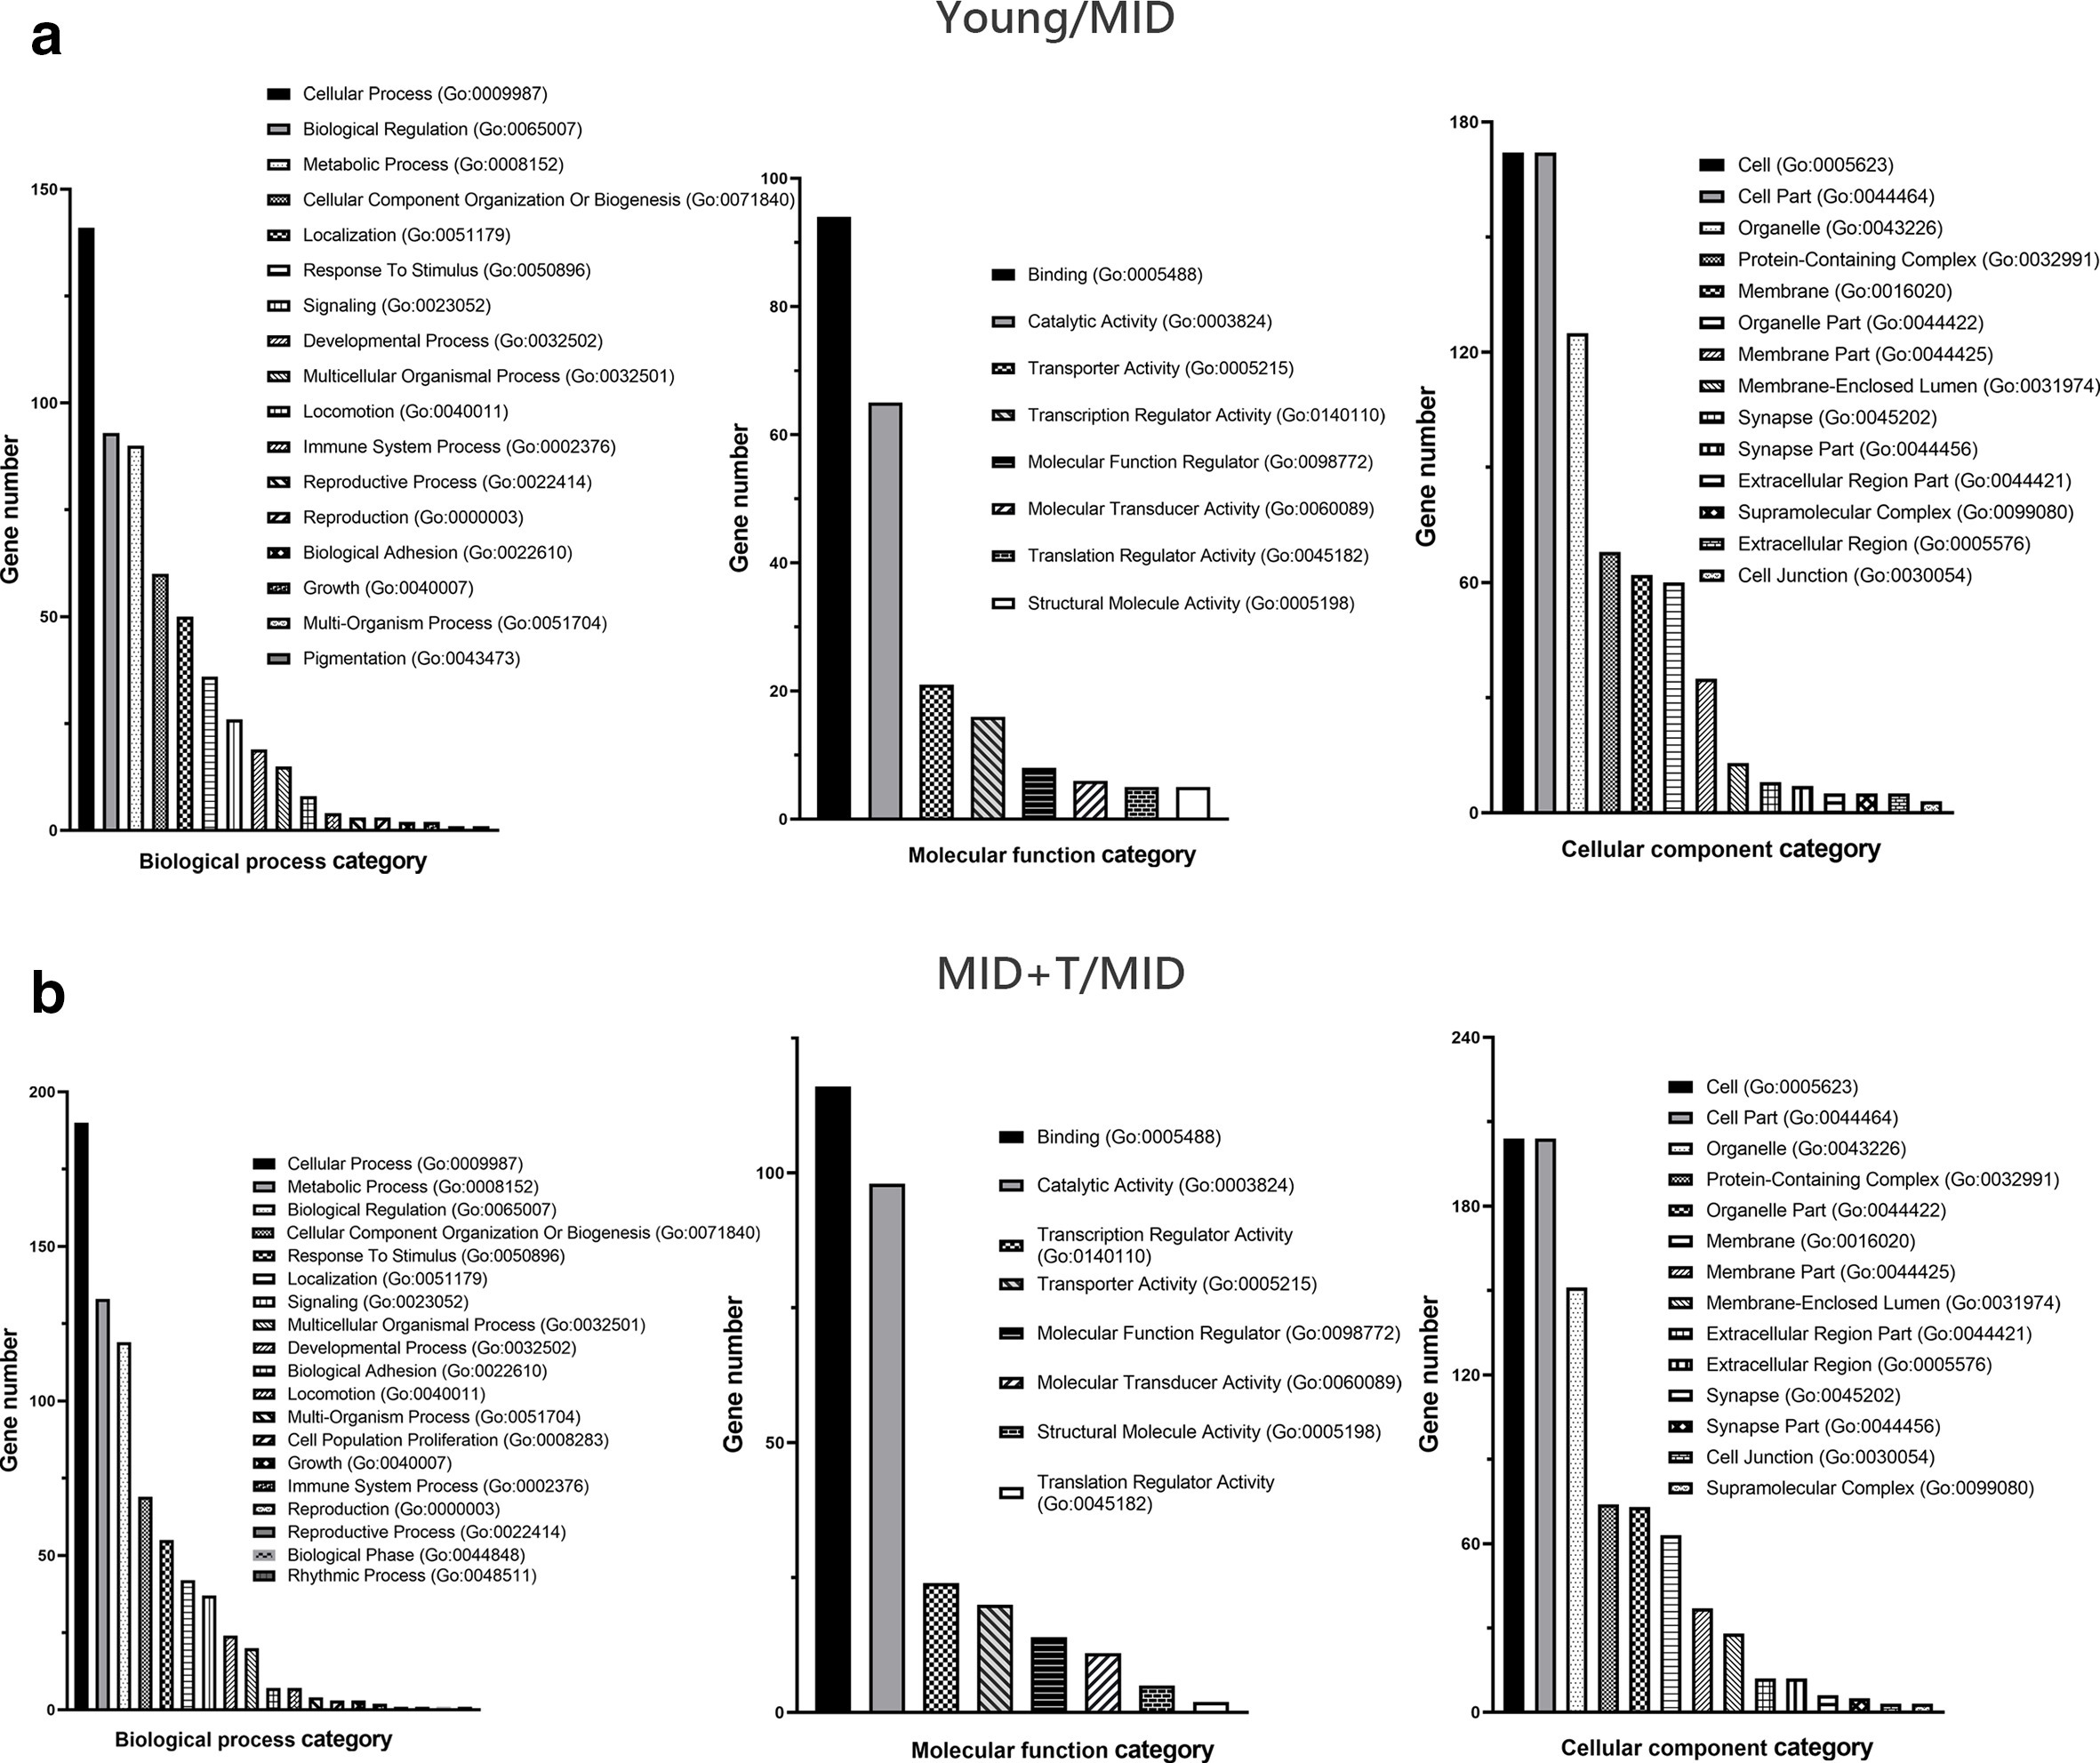 Fig. 6 
            The number of differentially expressed genes in each gene ontology term is shown in the histogram with the specification of the relevant biological process, molecular function, and cellular component. The differentially expressed genes were obtained from the a) young/MID and b) MID+ T/MID groups.
          